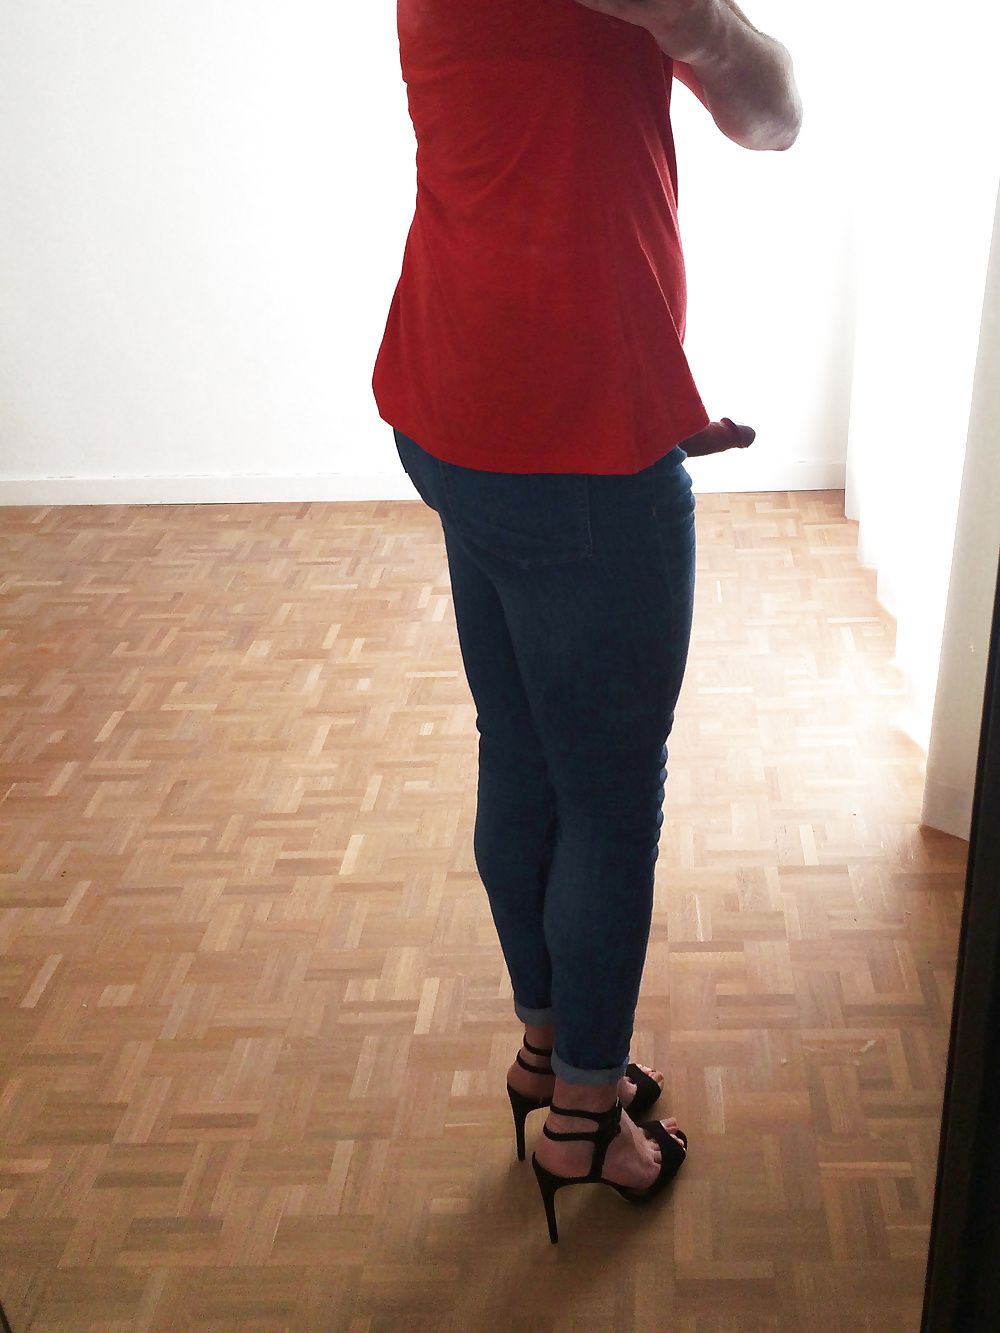 Jeans & red top, whale tail :) #14